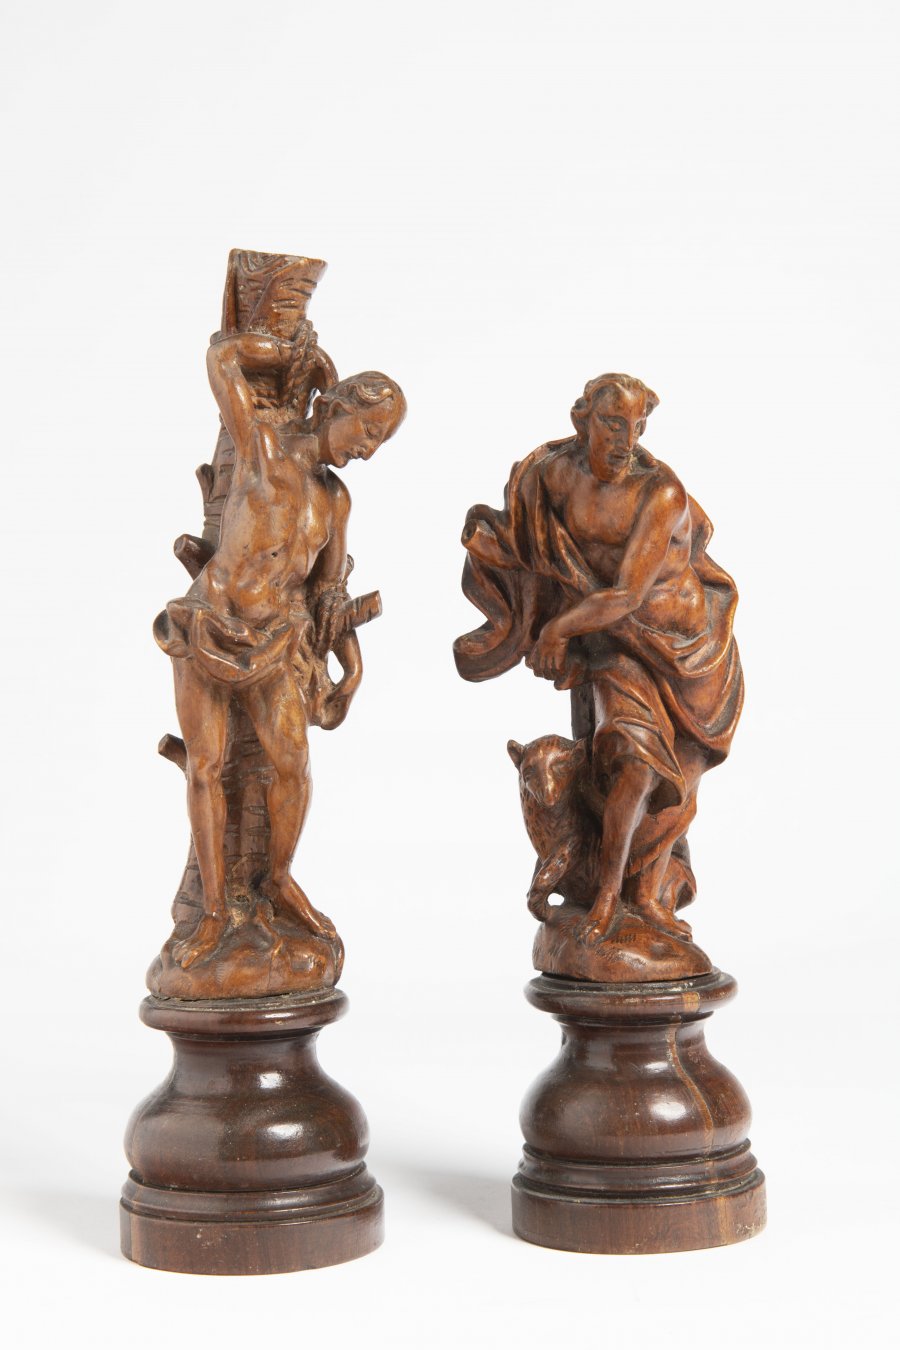 TWO BAROQUE SMALL SCULPTURES